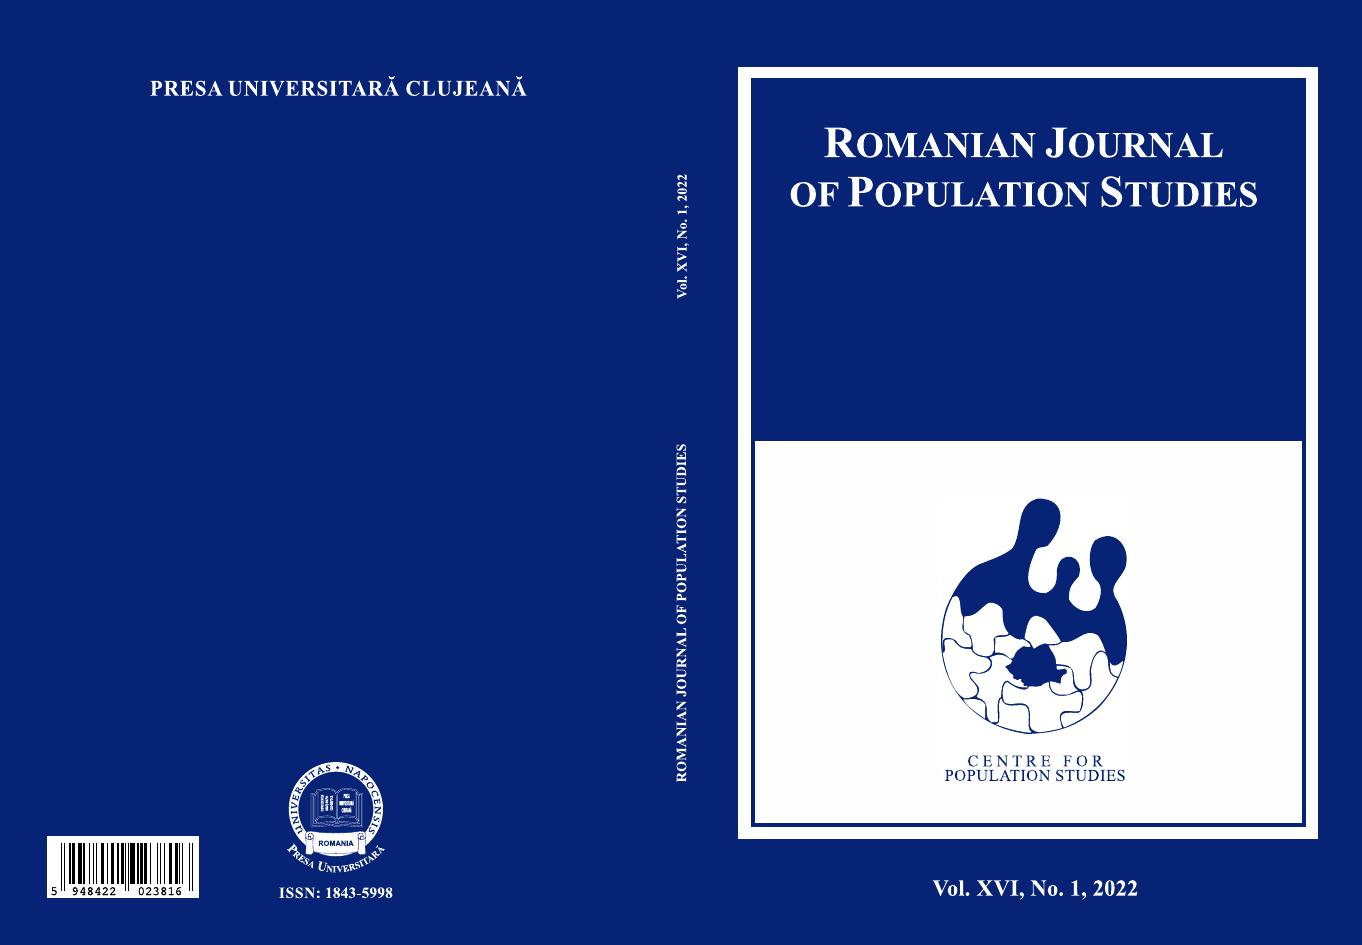 Local Human Development of Rural Places in Romania: A Community Capitals Framework